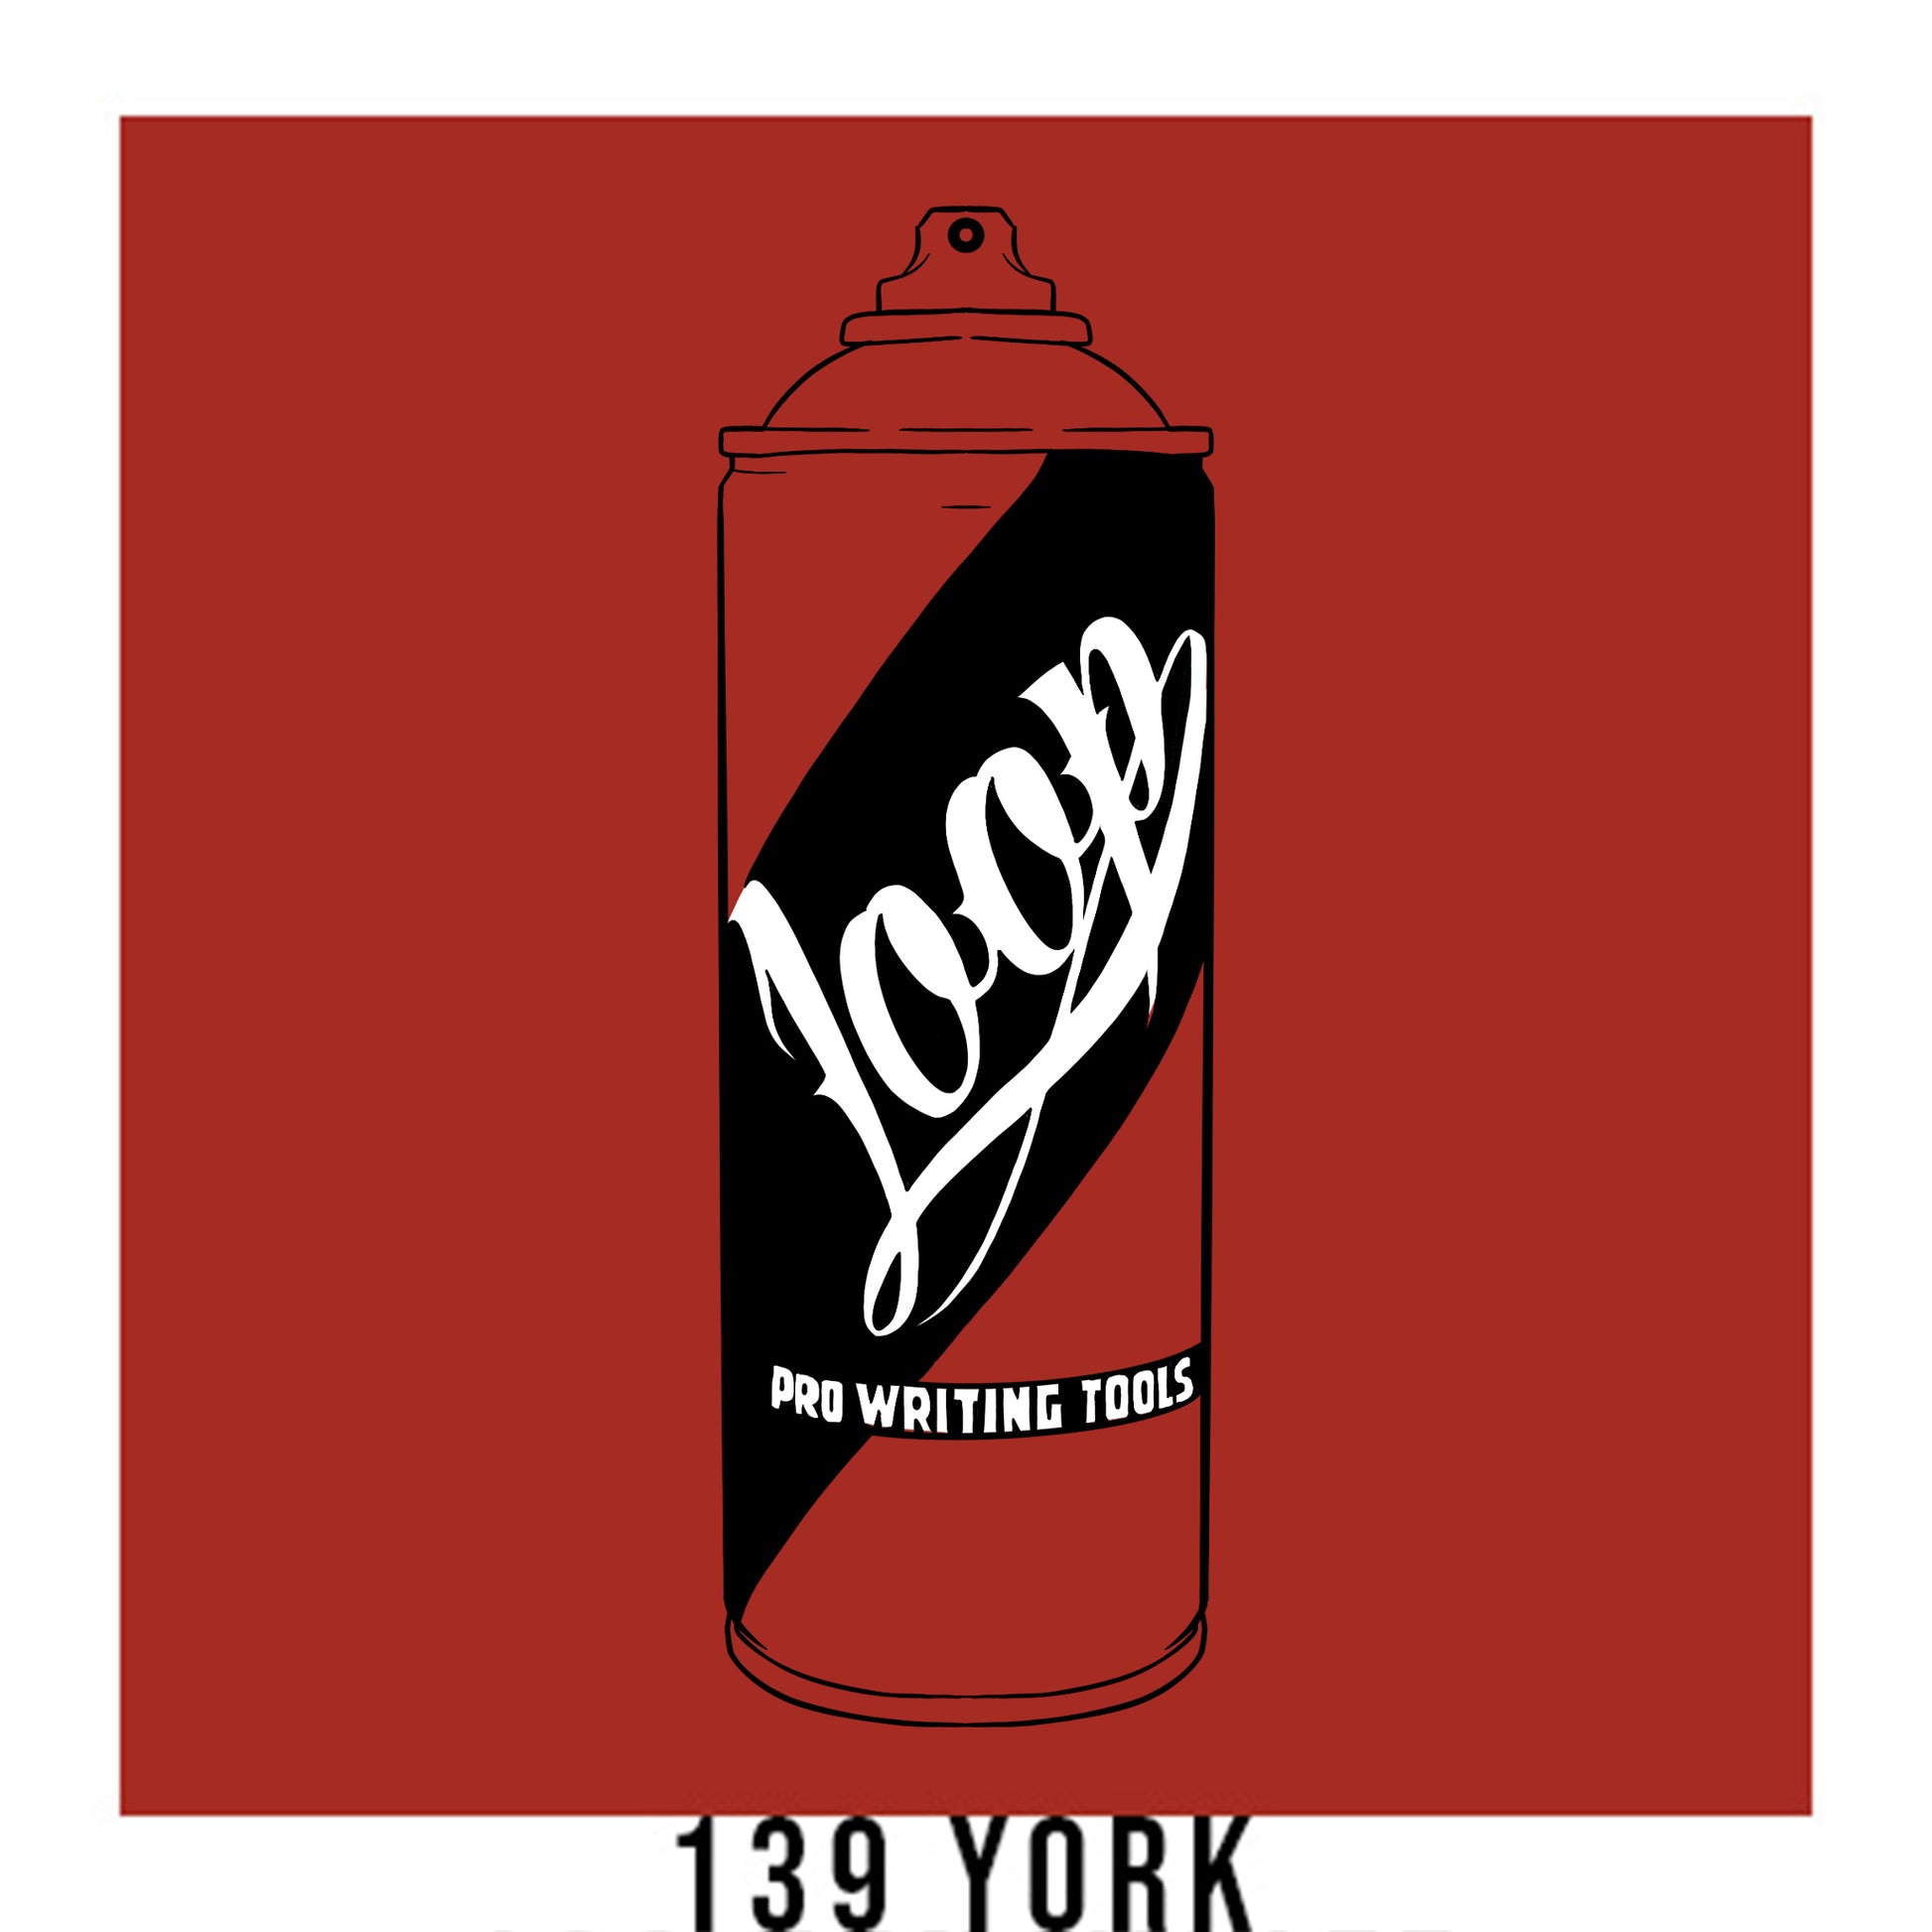 A black outline drawing of a red orange spray paint can with the word "Loop" written on the face in script. The background is a color swatch of the same red orange with a white border with the words "139 york" at the bottom.